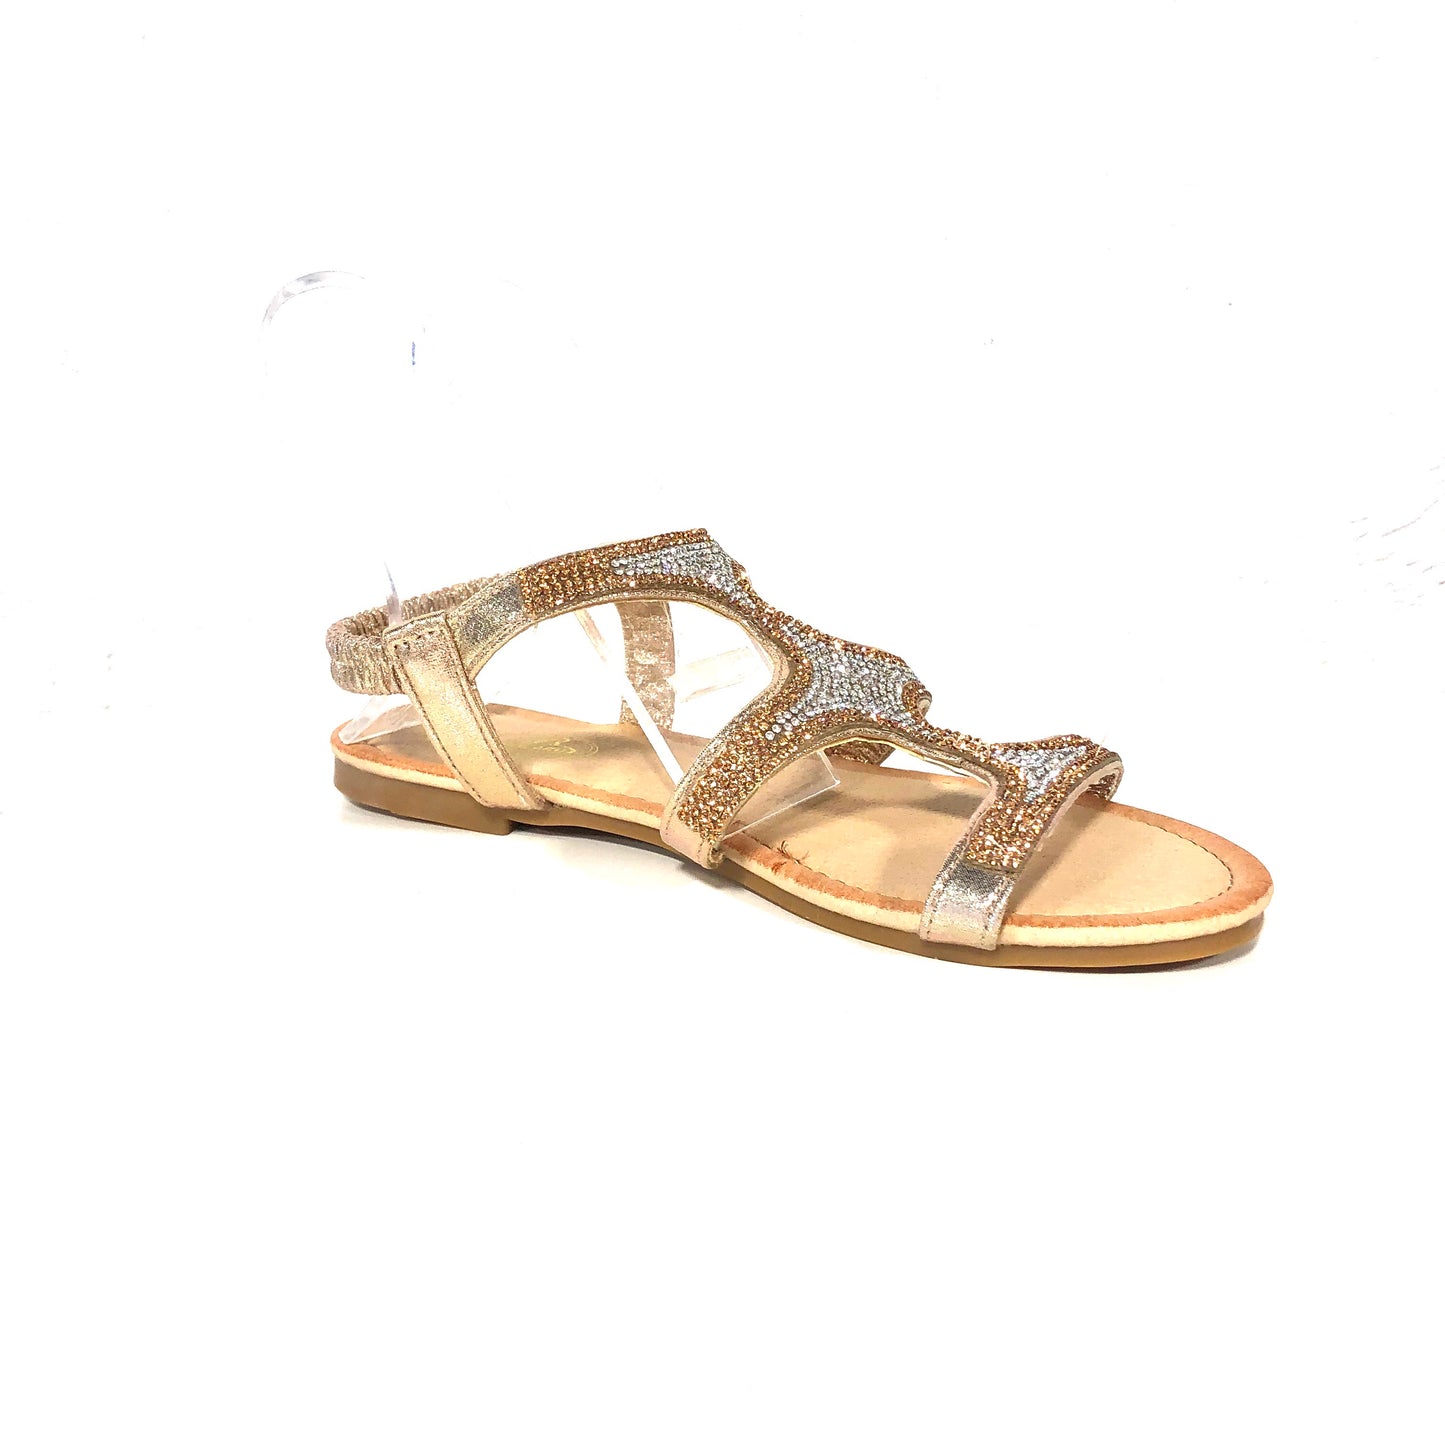 Champagne Rose Gold Strappy Sandals - The Shoe Trunk